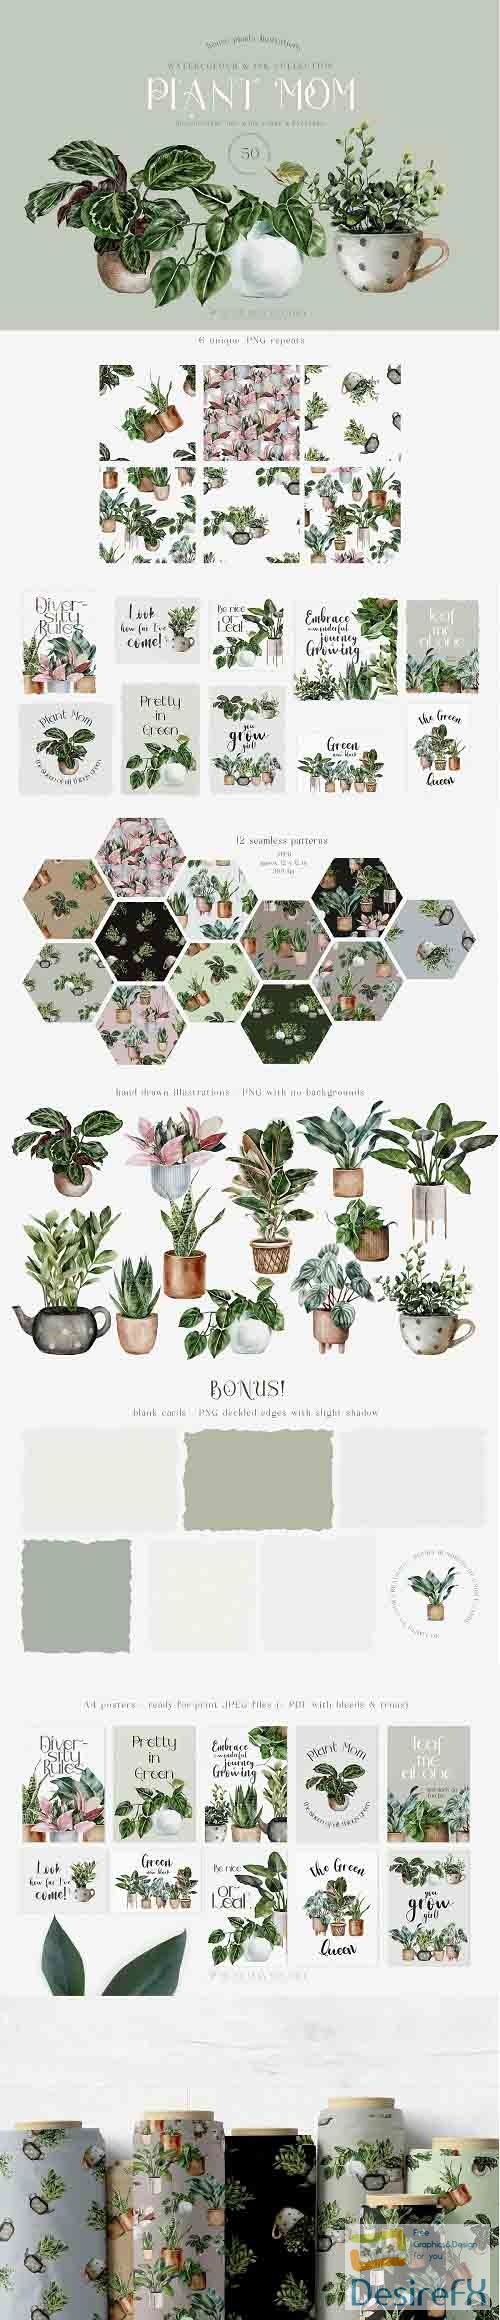 House Plants Illustrations and Patterns Big Collection - 1311192